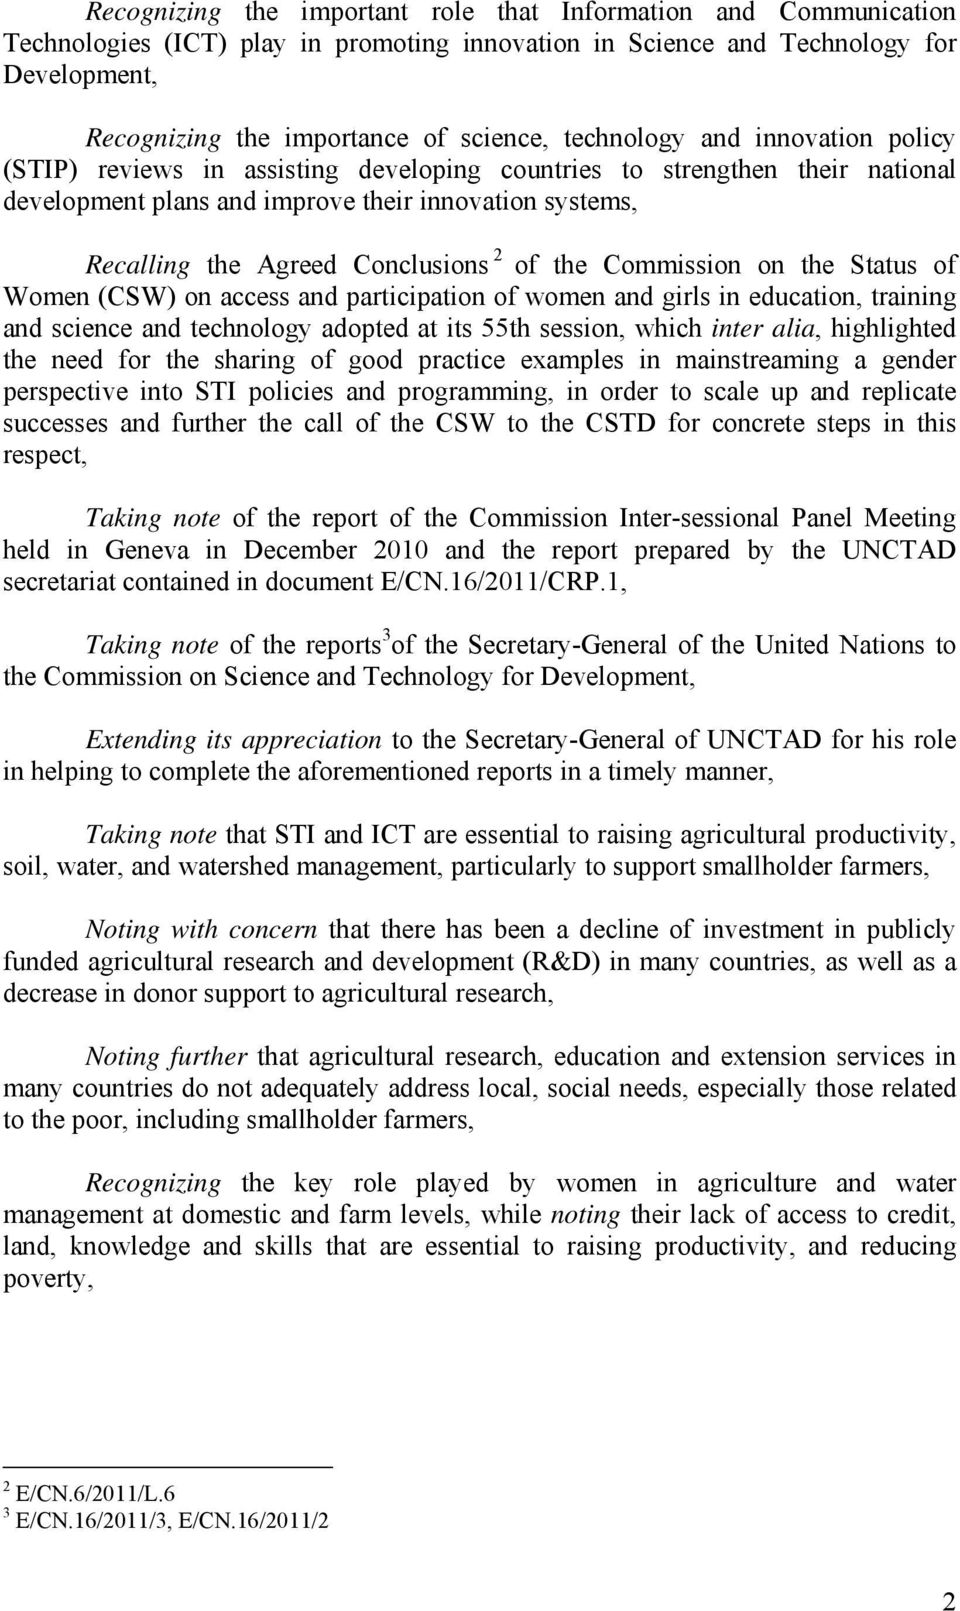 2 of the Commission on the Status of Women (CSW) on access and participation of women and girls in education, training and science and technology adopted at its 55th session, which inter alia,